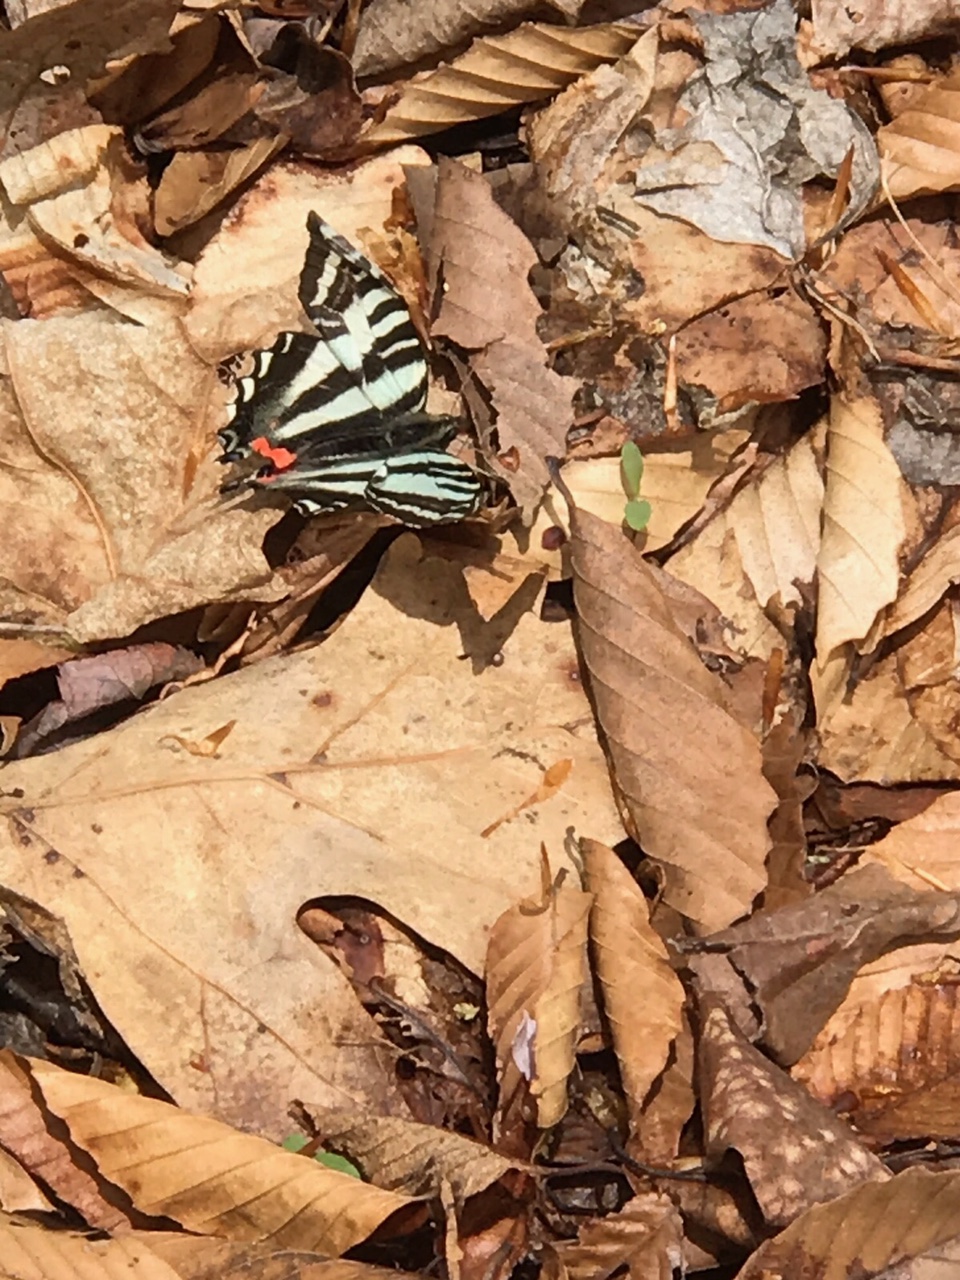 A black-and-white butterfly rests in the middle of a pile of dry leaves.